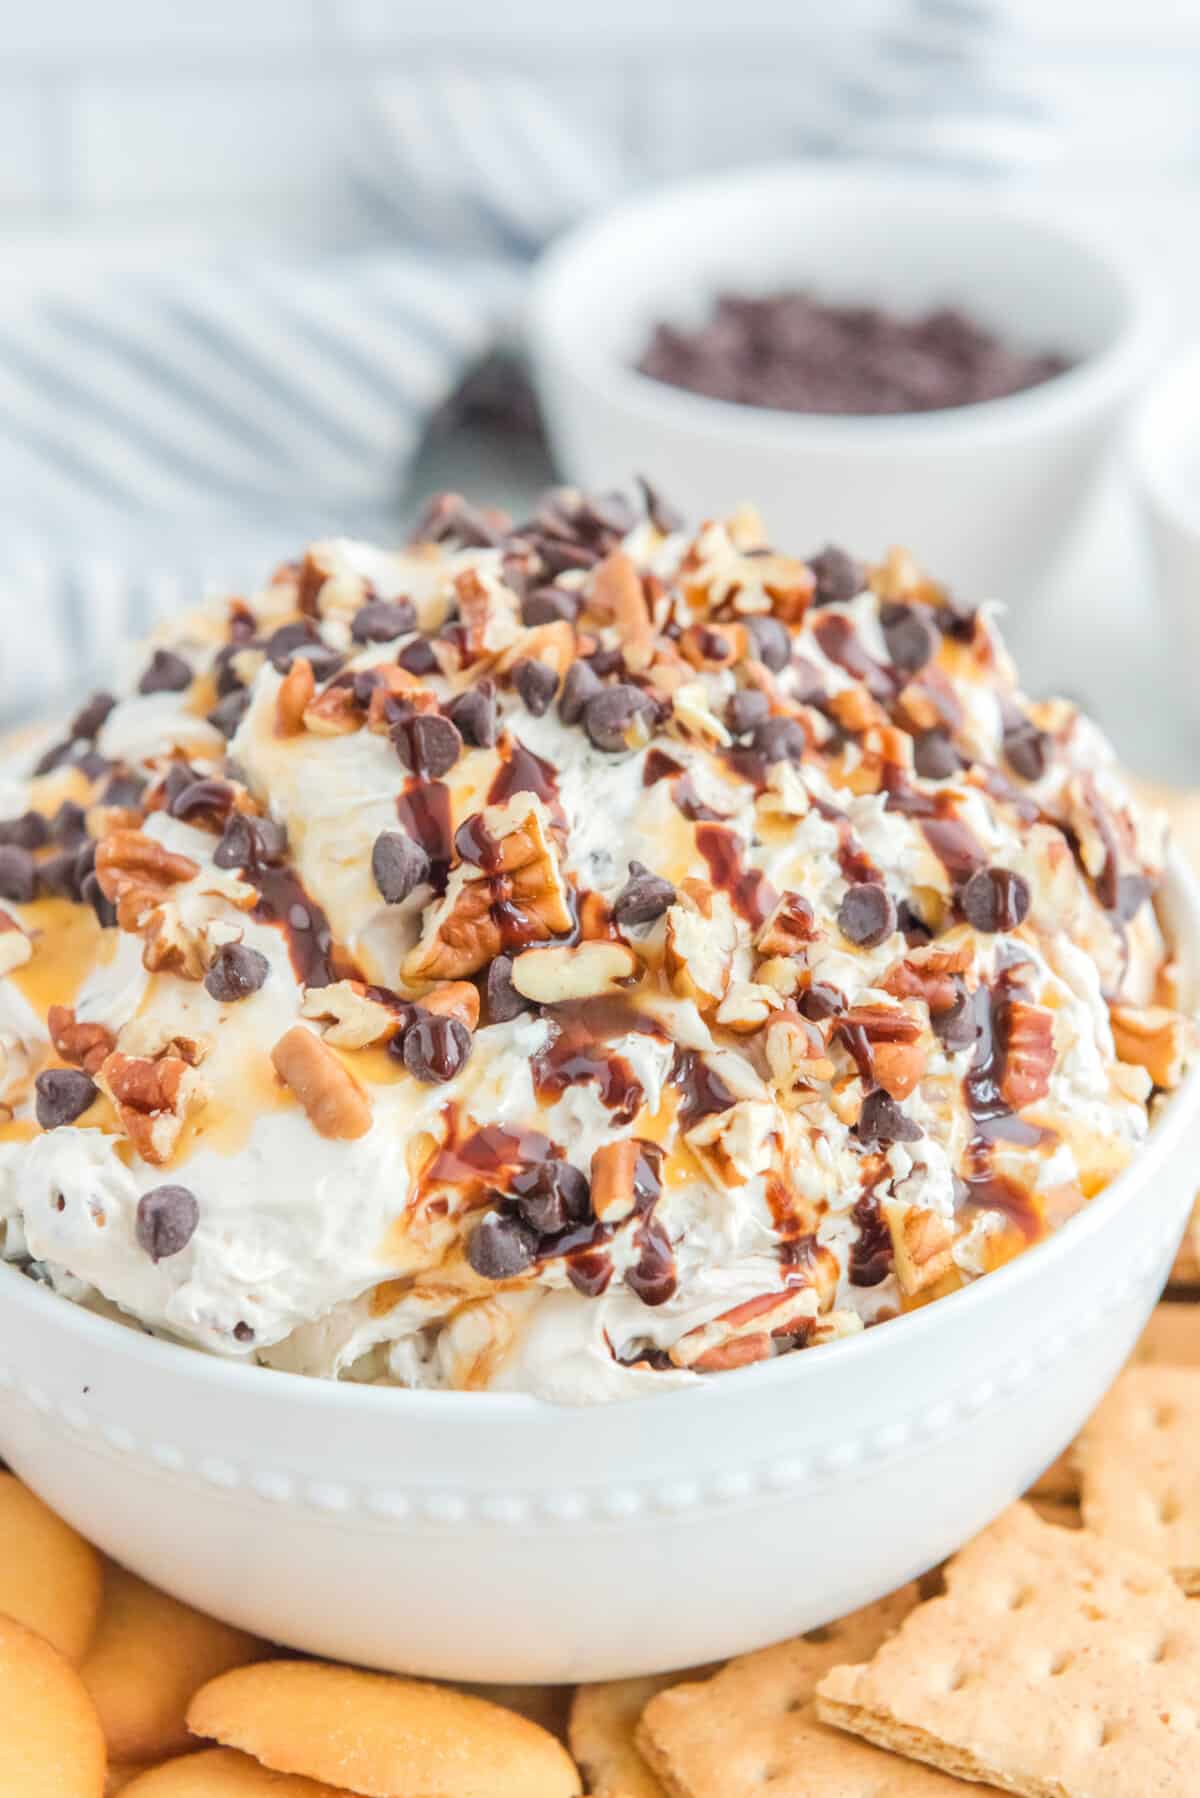 Turtle cheesecake dip with swirls of caramel, chocolate, and pecans, served in a white bowl.